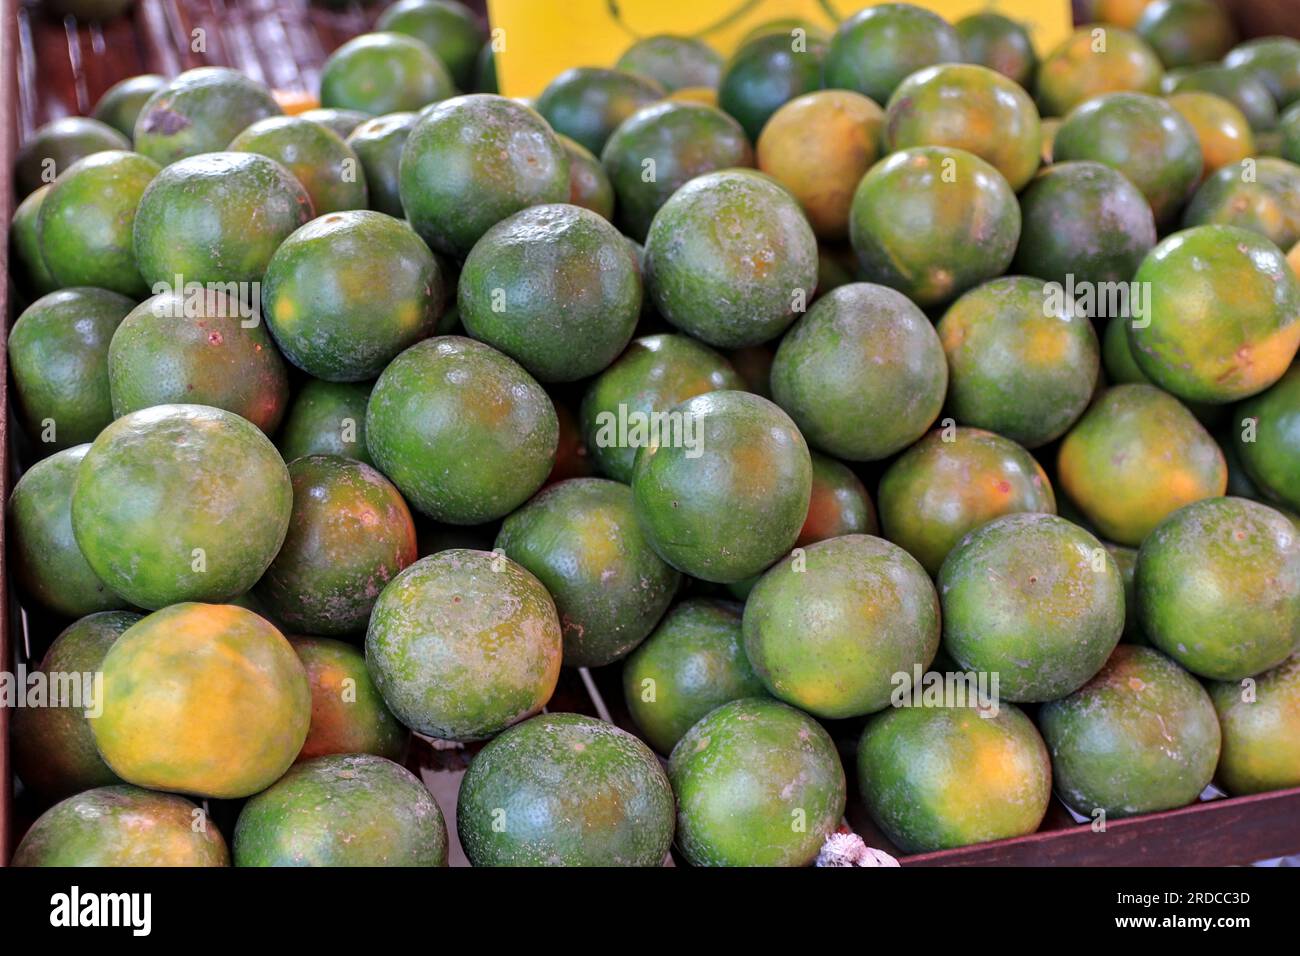 Lemons that farmers bring to sell themselves at the fresh market. for villagers in the area to buy and cook Stock Photo